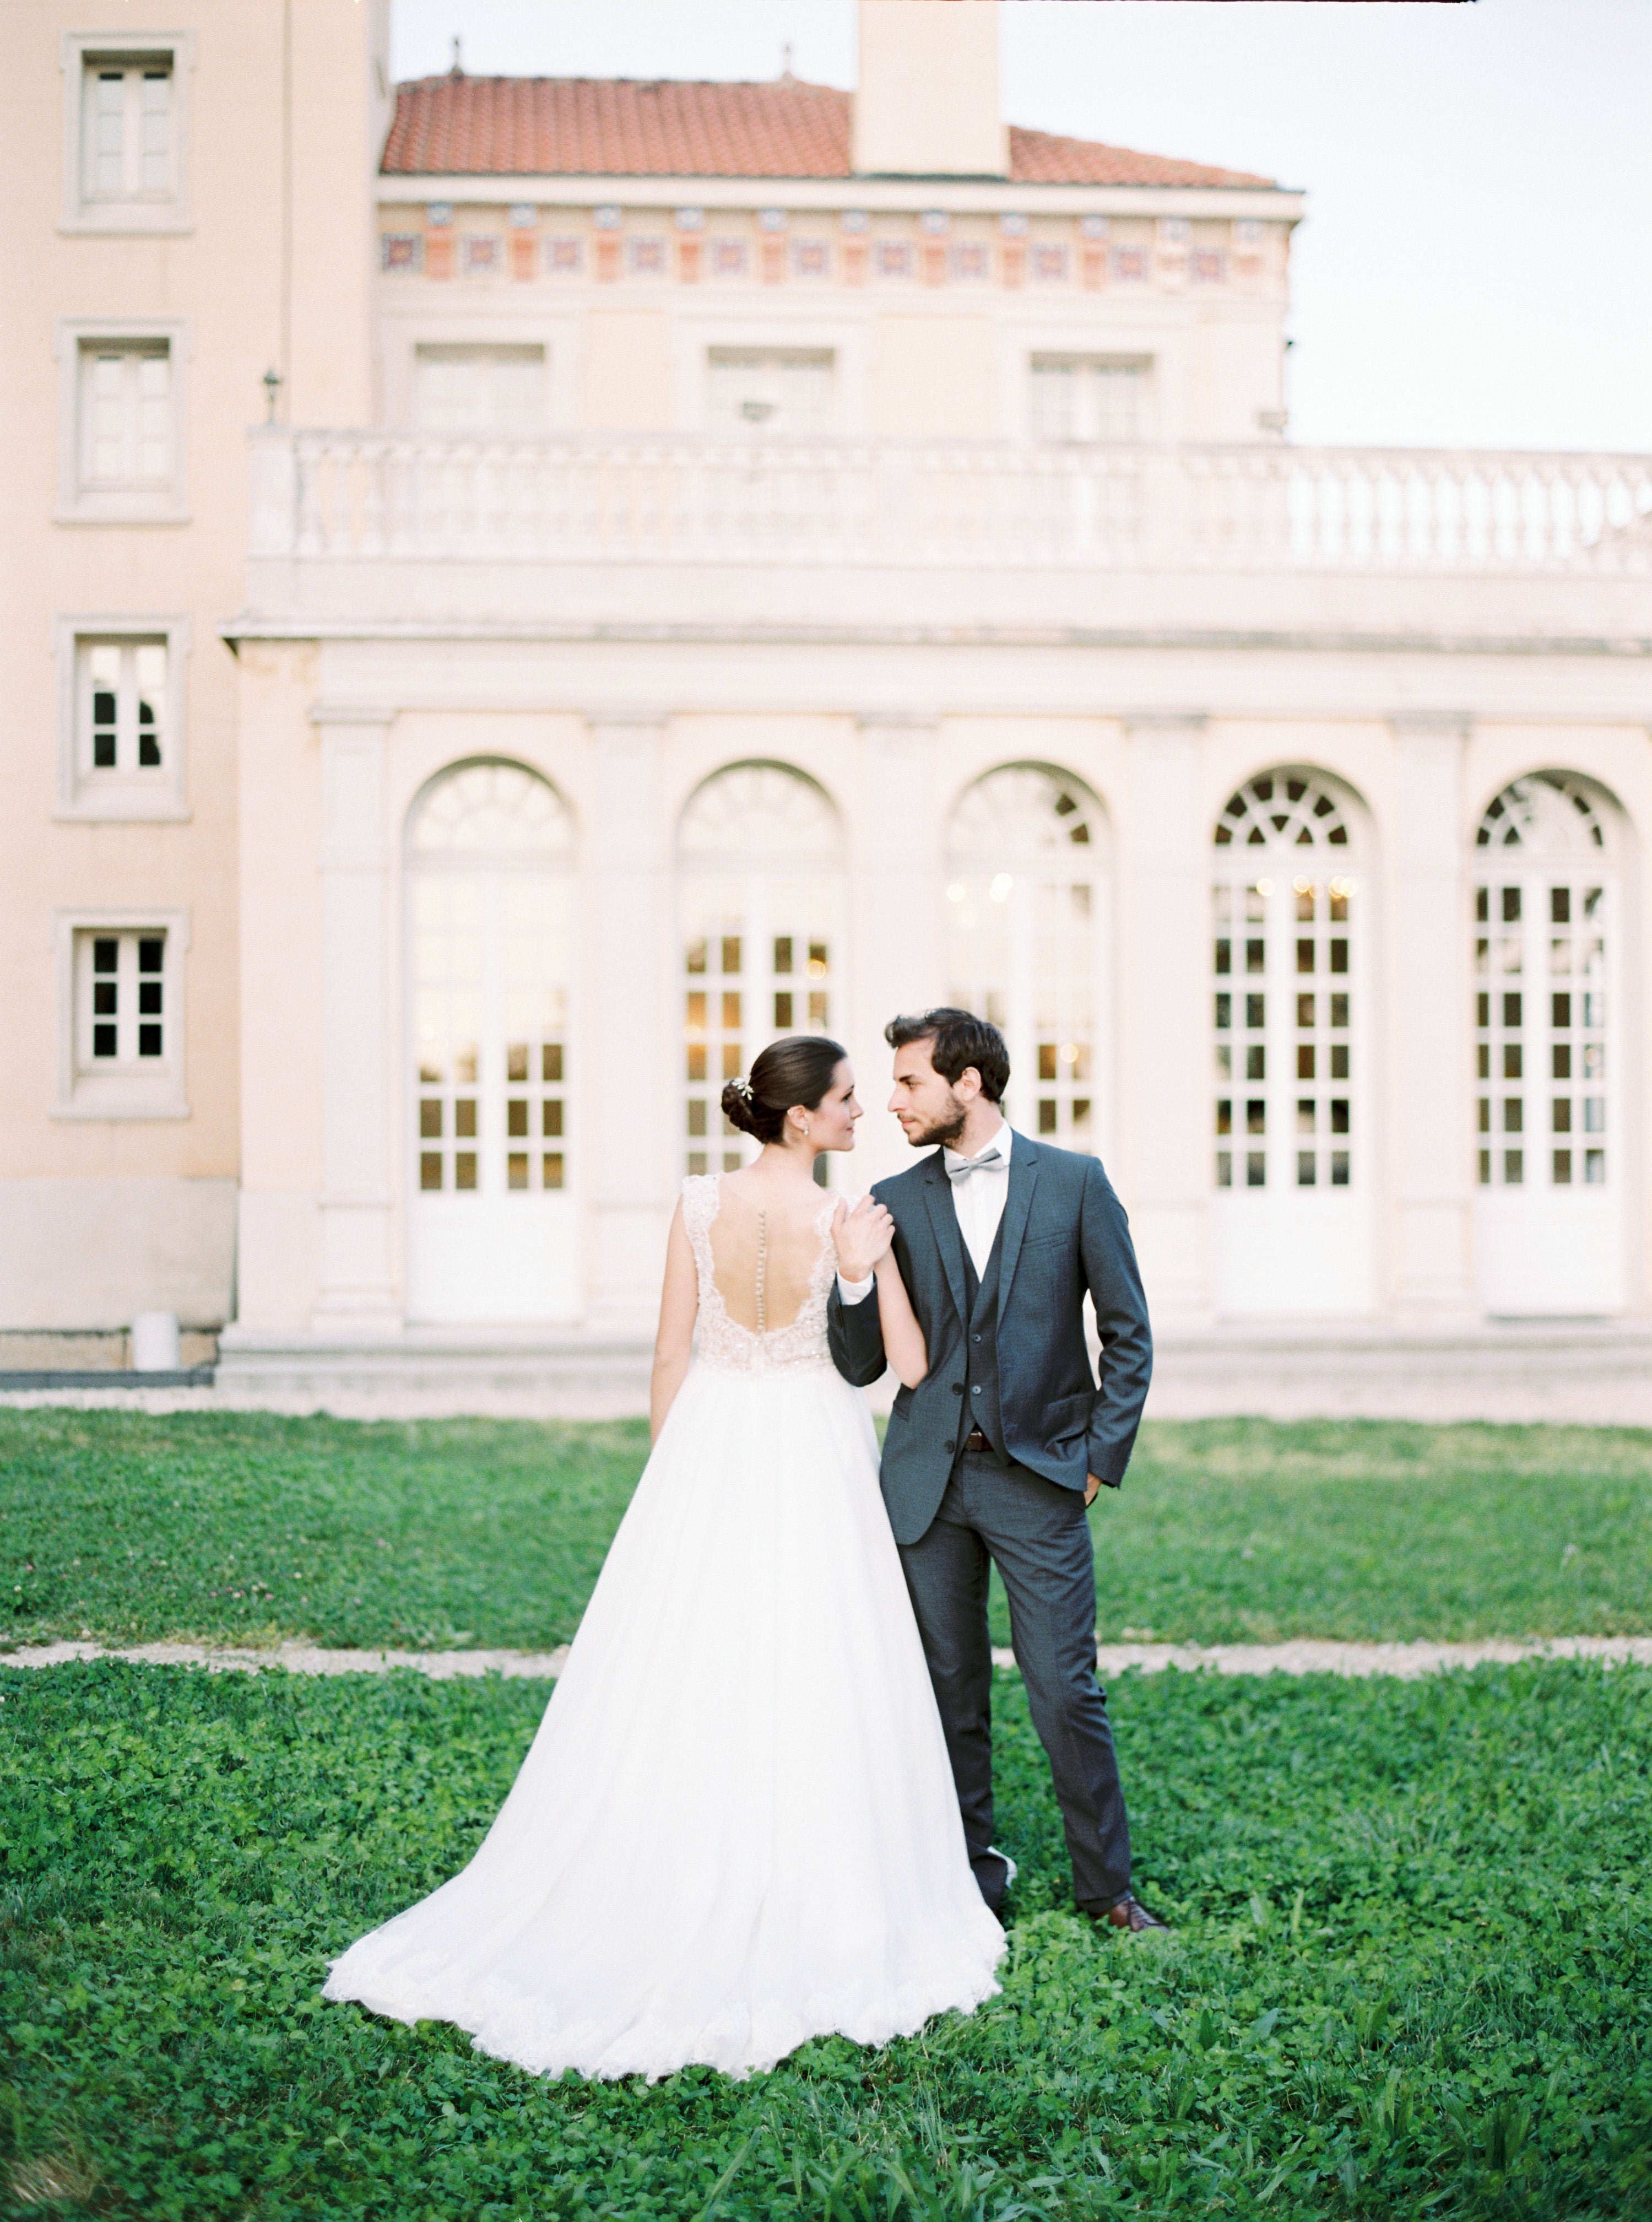 LUXURY CHATEAU WEDDING IN THE FRENCH RIVIERA